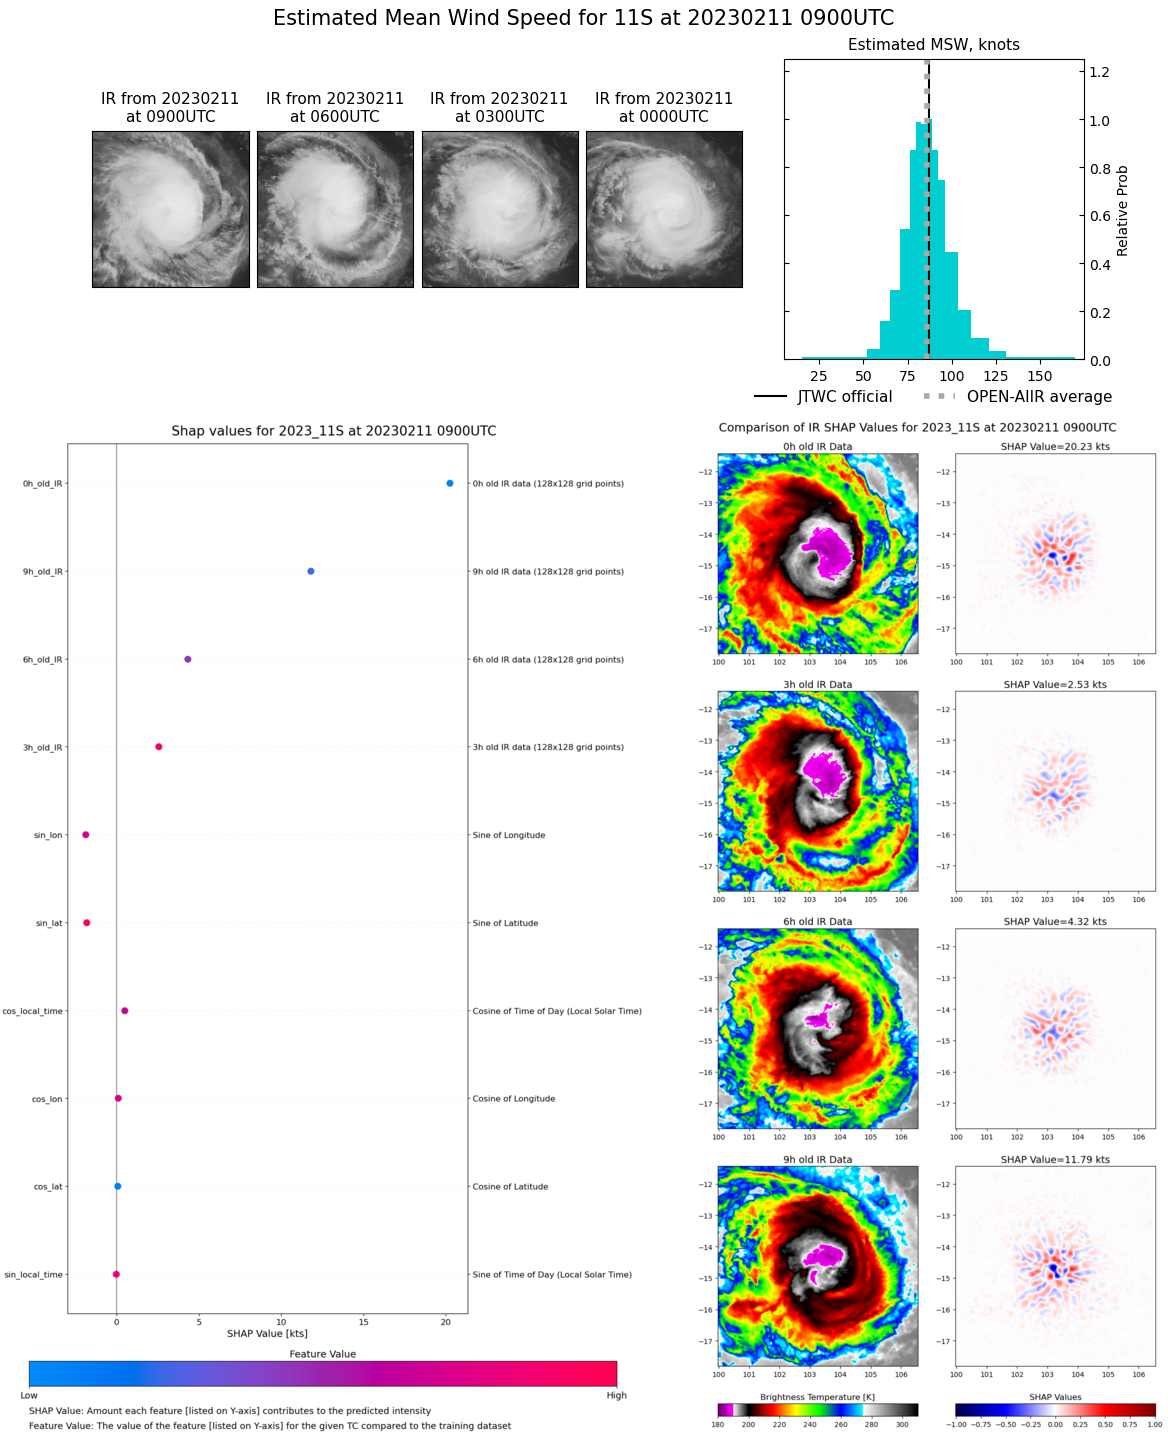 SATELLITE ANALYSIS, INITIAL POSITION AND INTENSITY DISCUSSION: ANIMATED MULTISPECTRAL SATELLITE IMAGERY (MSI) SHOWS A COMPACT SYSTEM THAT HAS MAINTAINED OVERALL SYMMETRICAL CONVECTIVE SIGNATURE WITH SHORT SHALLOW FEEDER BANDS WRAPPED CLOSE TO THE CORE. THE  CENTRAL DENSE OVERCAST HAS SLIGHTLY DEEPENED OVER THE LAST 12 HRS.  THE INITIAL POSITION IS EXTRAPOLATED WITH HIGH CONFIDENCE FROM A  MICROWAVE EYE FEATURE IN THE 102206Z SSMIS 89GHZ IMAGES. THE INITIAL  INTENSITY IS ALSO PLACED WITH HIGH CONFIDENCE BASED ON AN OVERALL  ASSESSMENT OF AGENCY AND AUTOMATED DVORAK ESTIMATES AND REFLECTS THE  SLIGHT 12-HR IMPROVEMENT. ANALYSIS INDICATES A FAVORABLE ENVIRONMENT  WITH WARM SST, LOW VWS, AND WITH MODERATE RADIAL OUTFLOW.